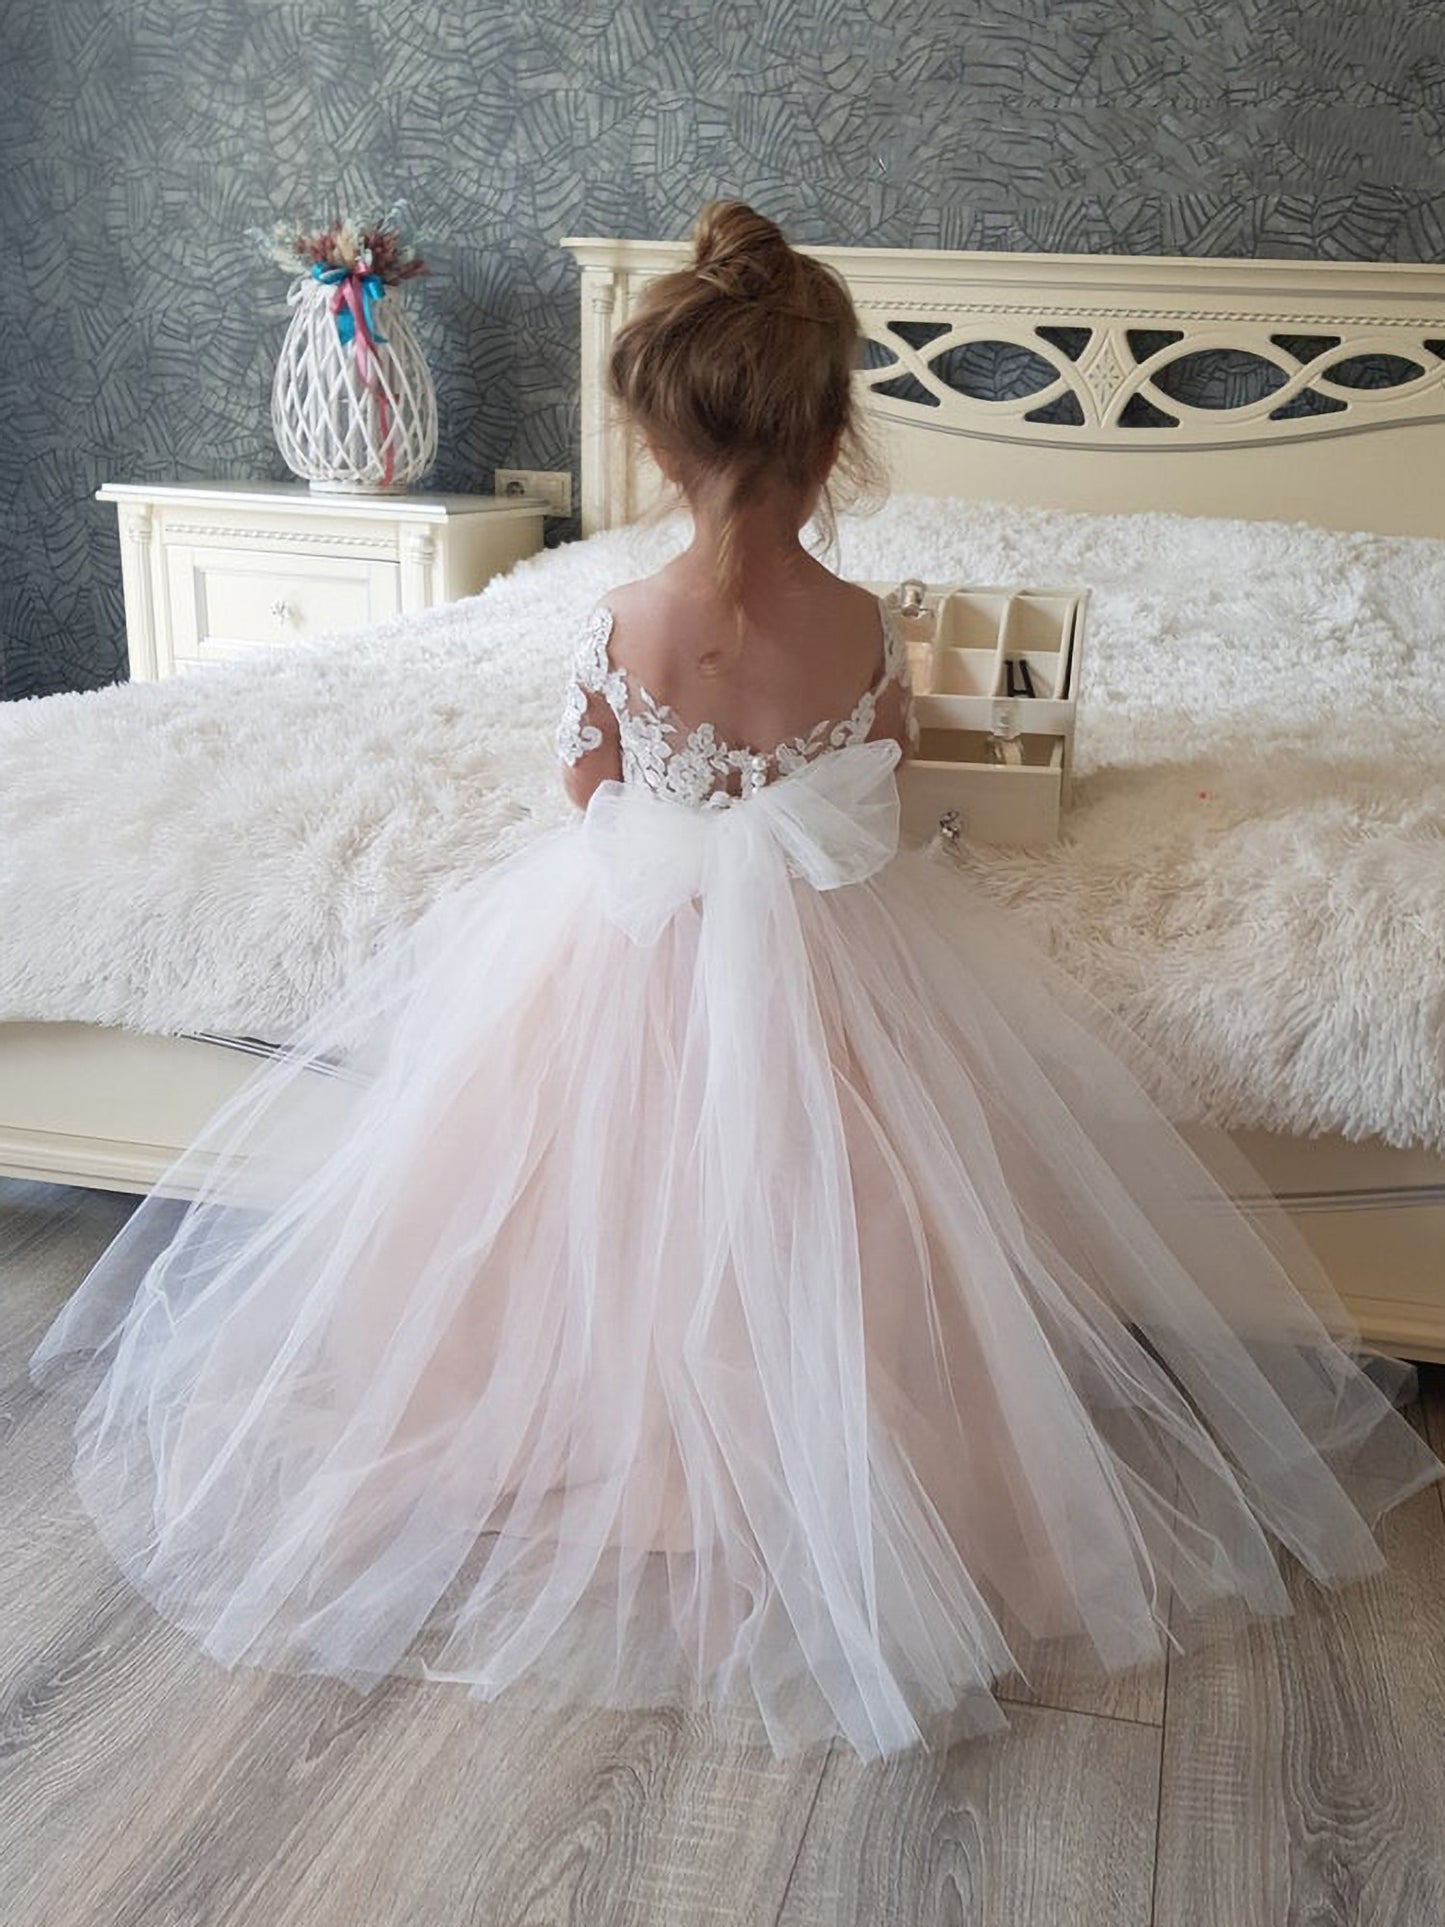 White Ivory Flower Girl Dresses V Neck Bridesmaid with Bow Lace Appqulies Tulle